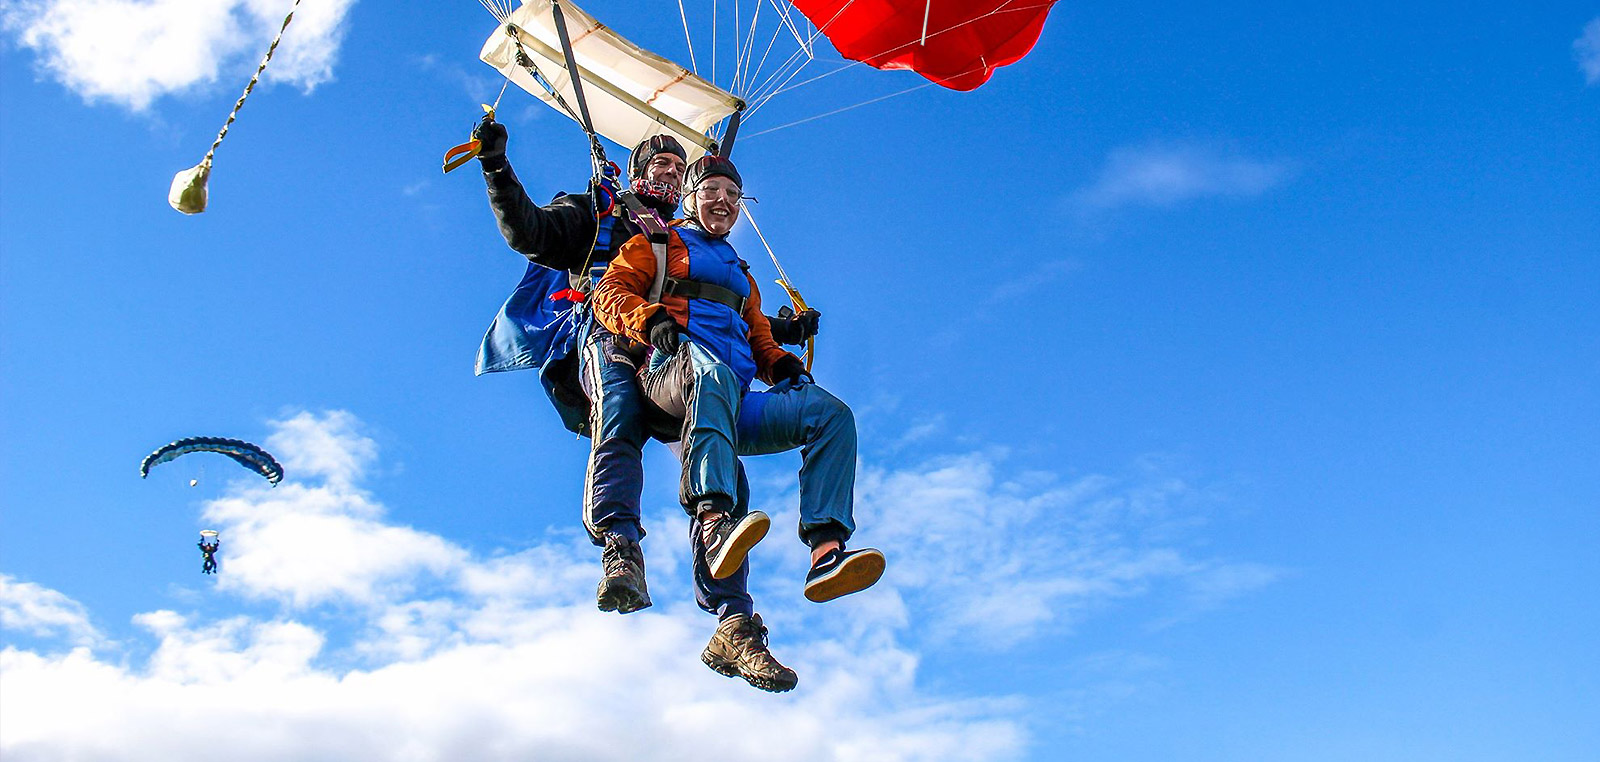 Parachute Jumping | Skydiving Experiences and Courses in UK